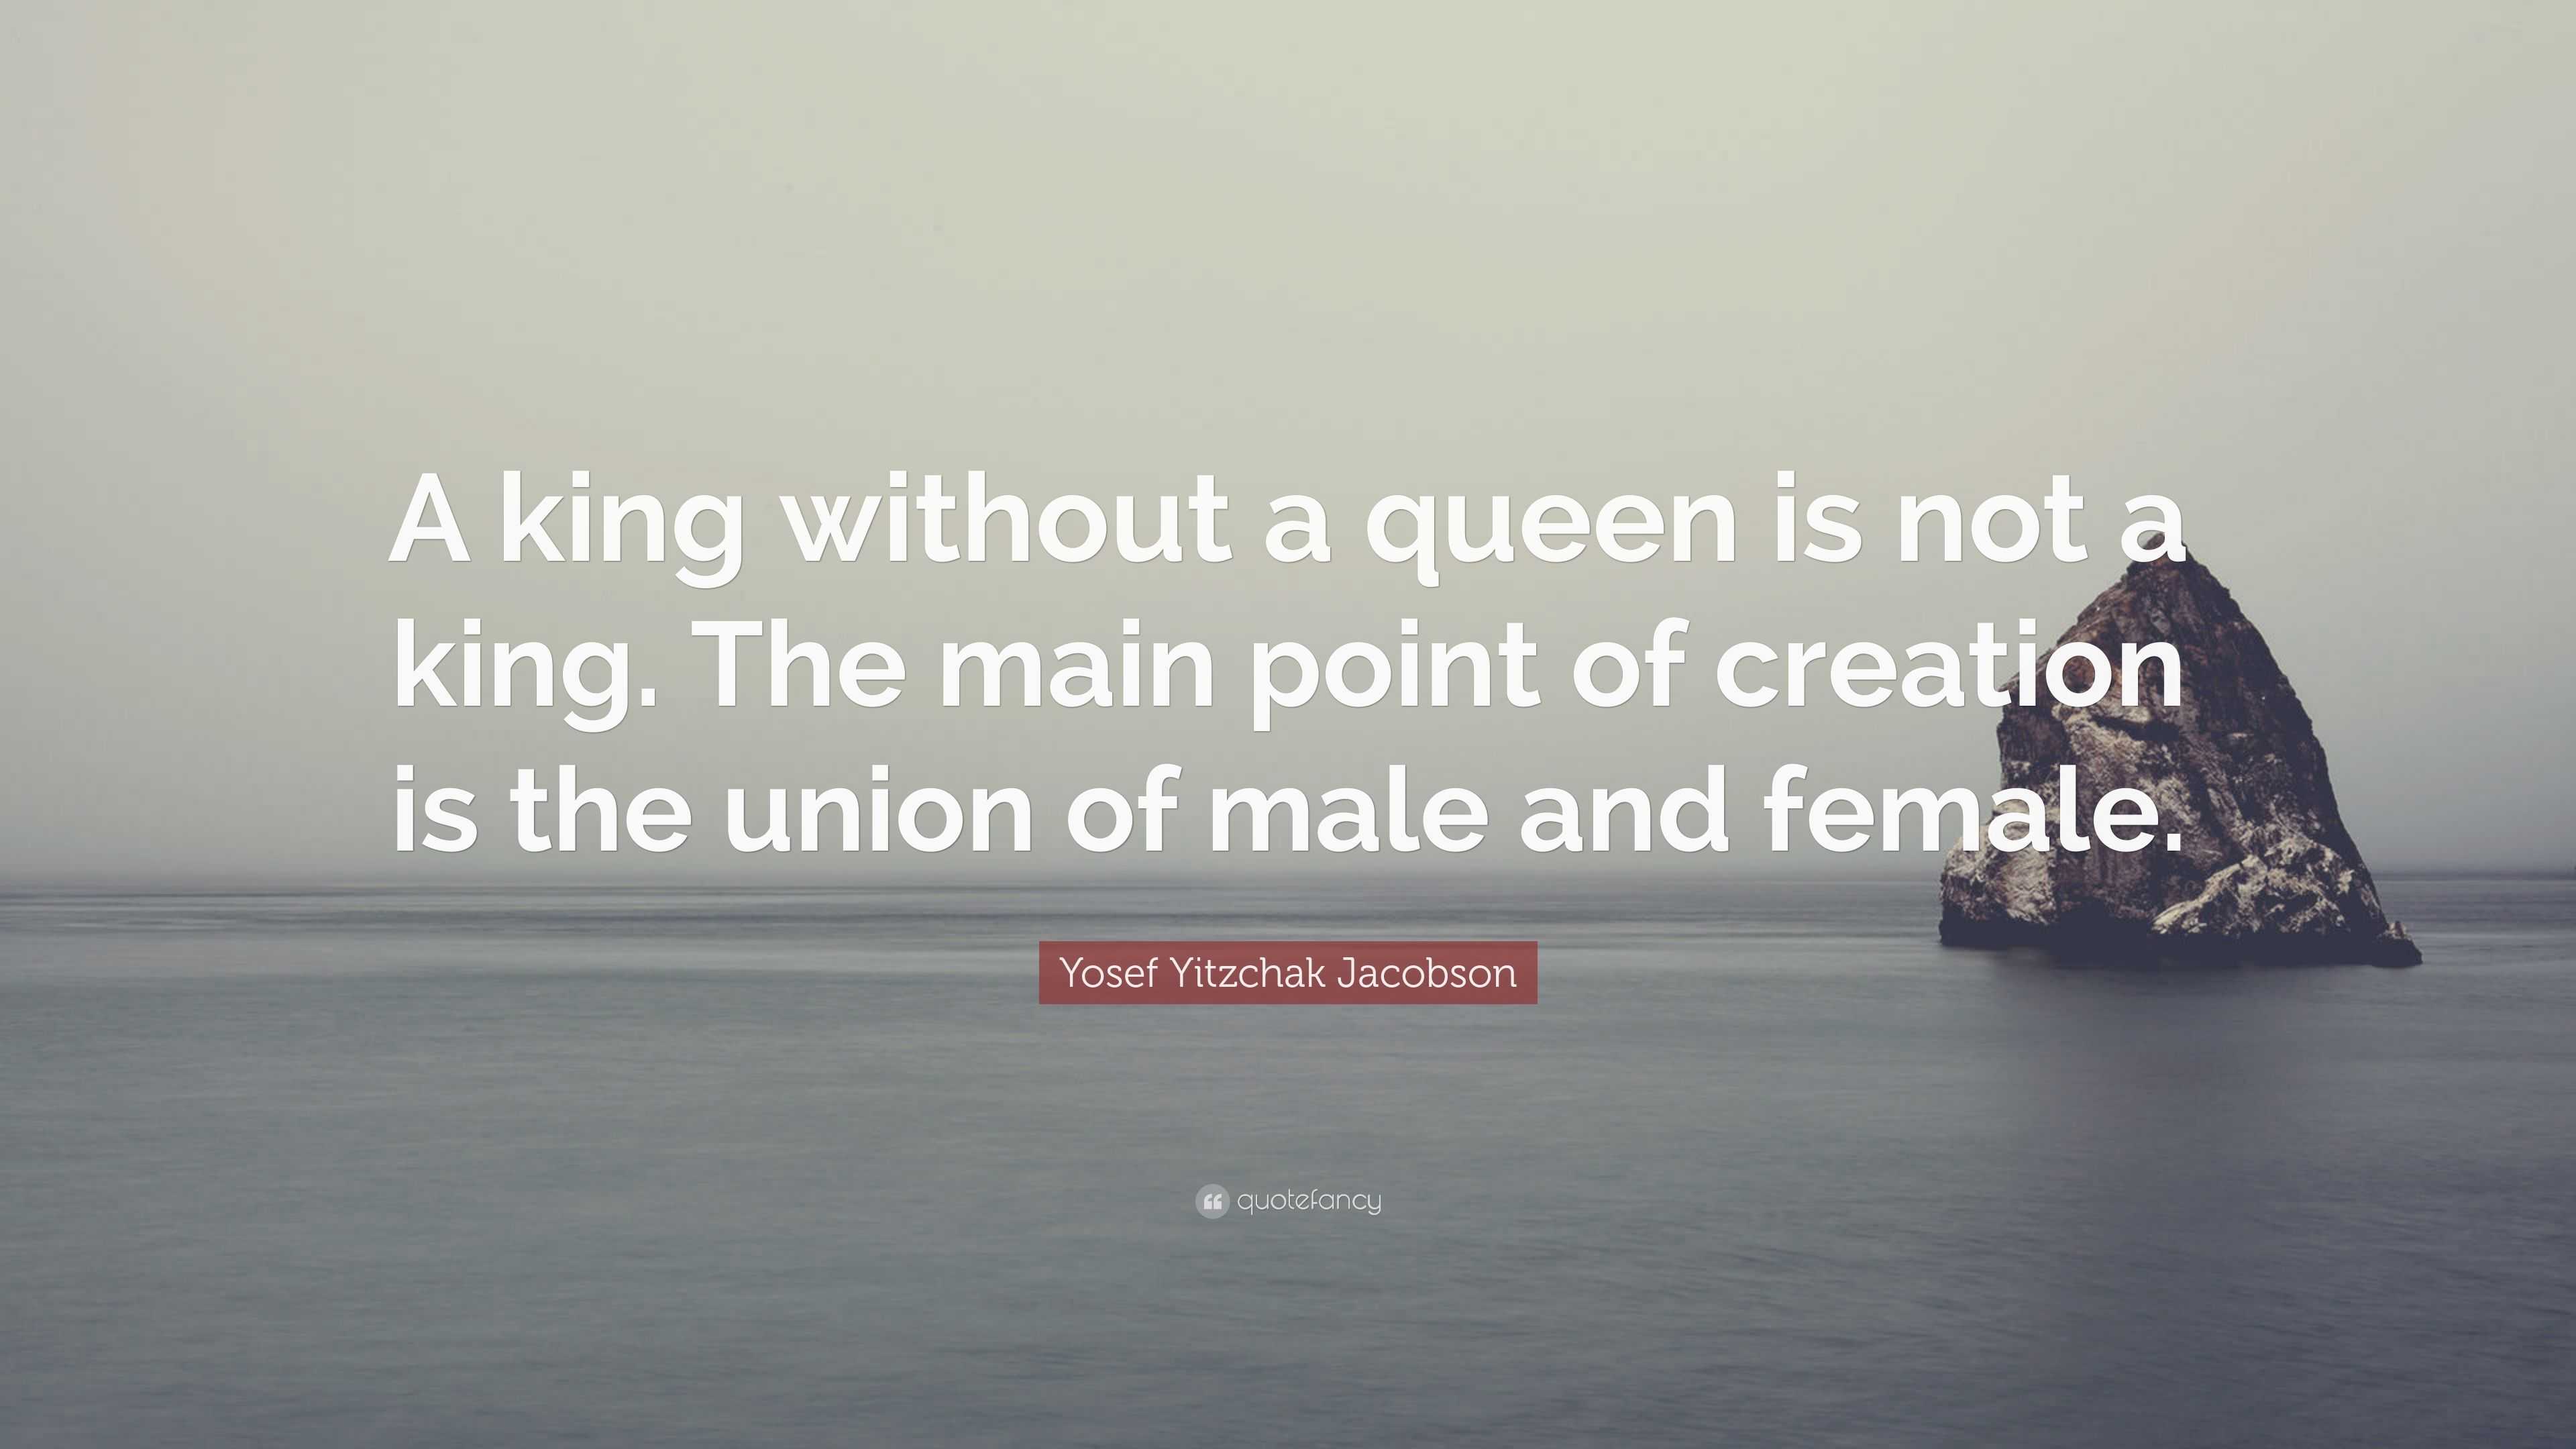 Yosef Yitzchak Jacobson Quote: “A king without a queen is not a king ...